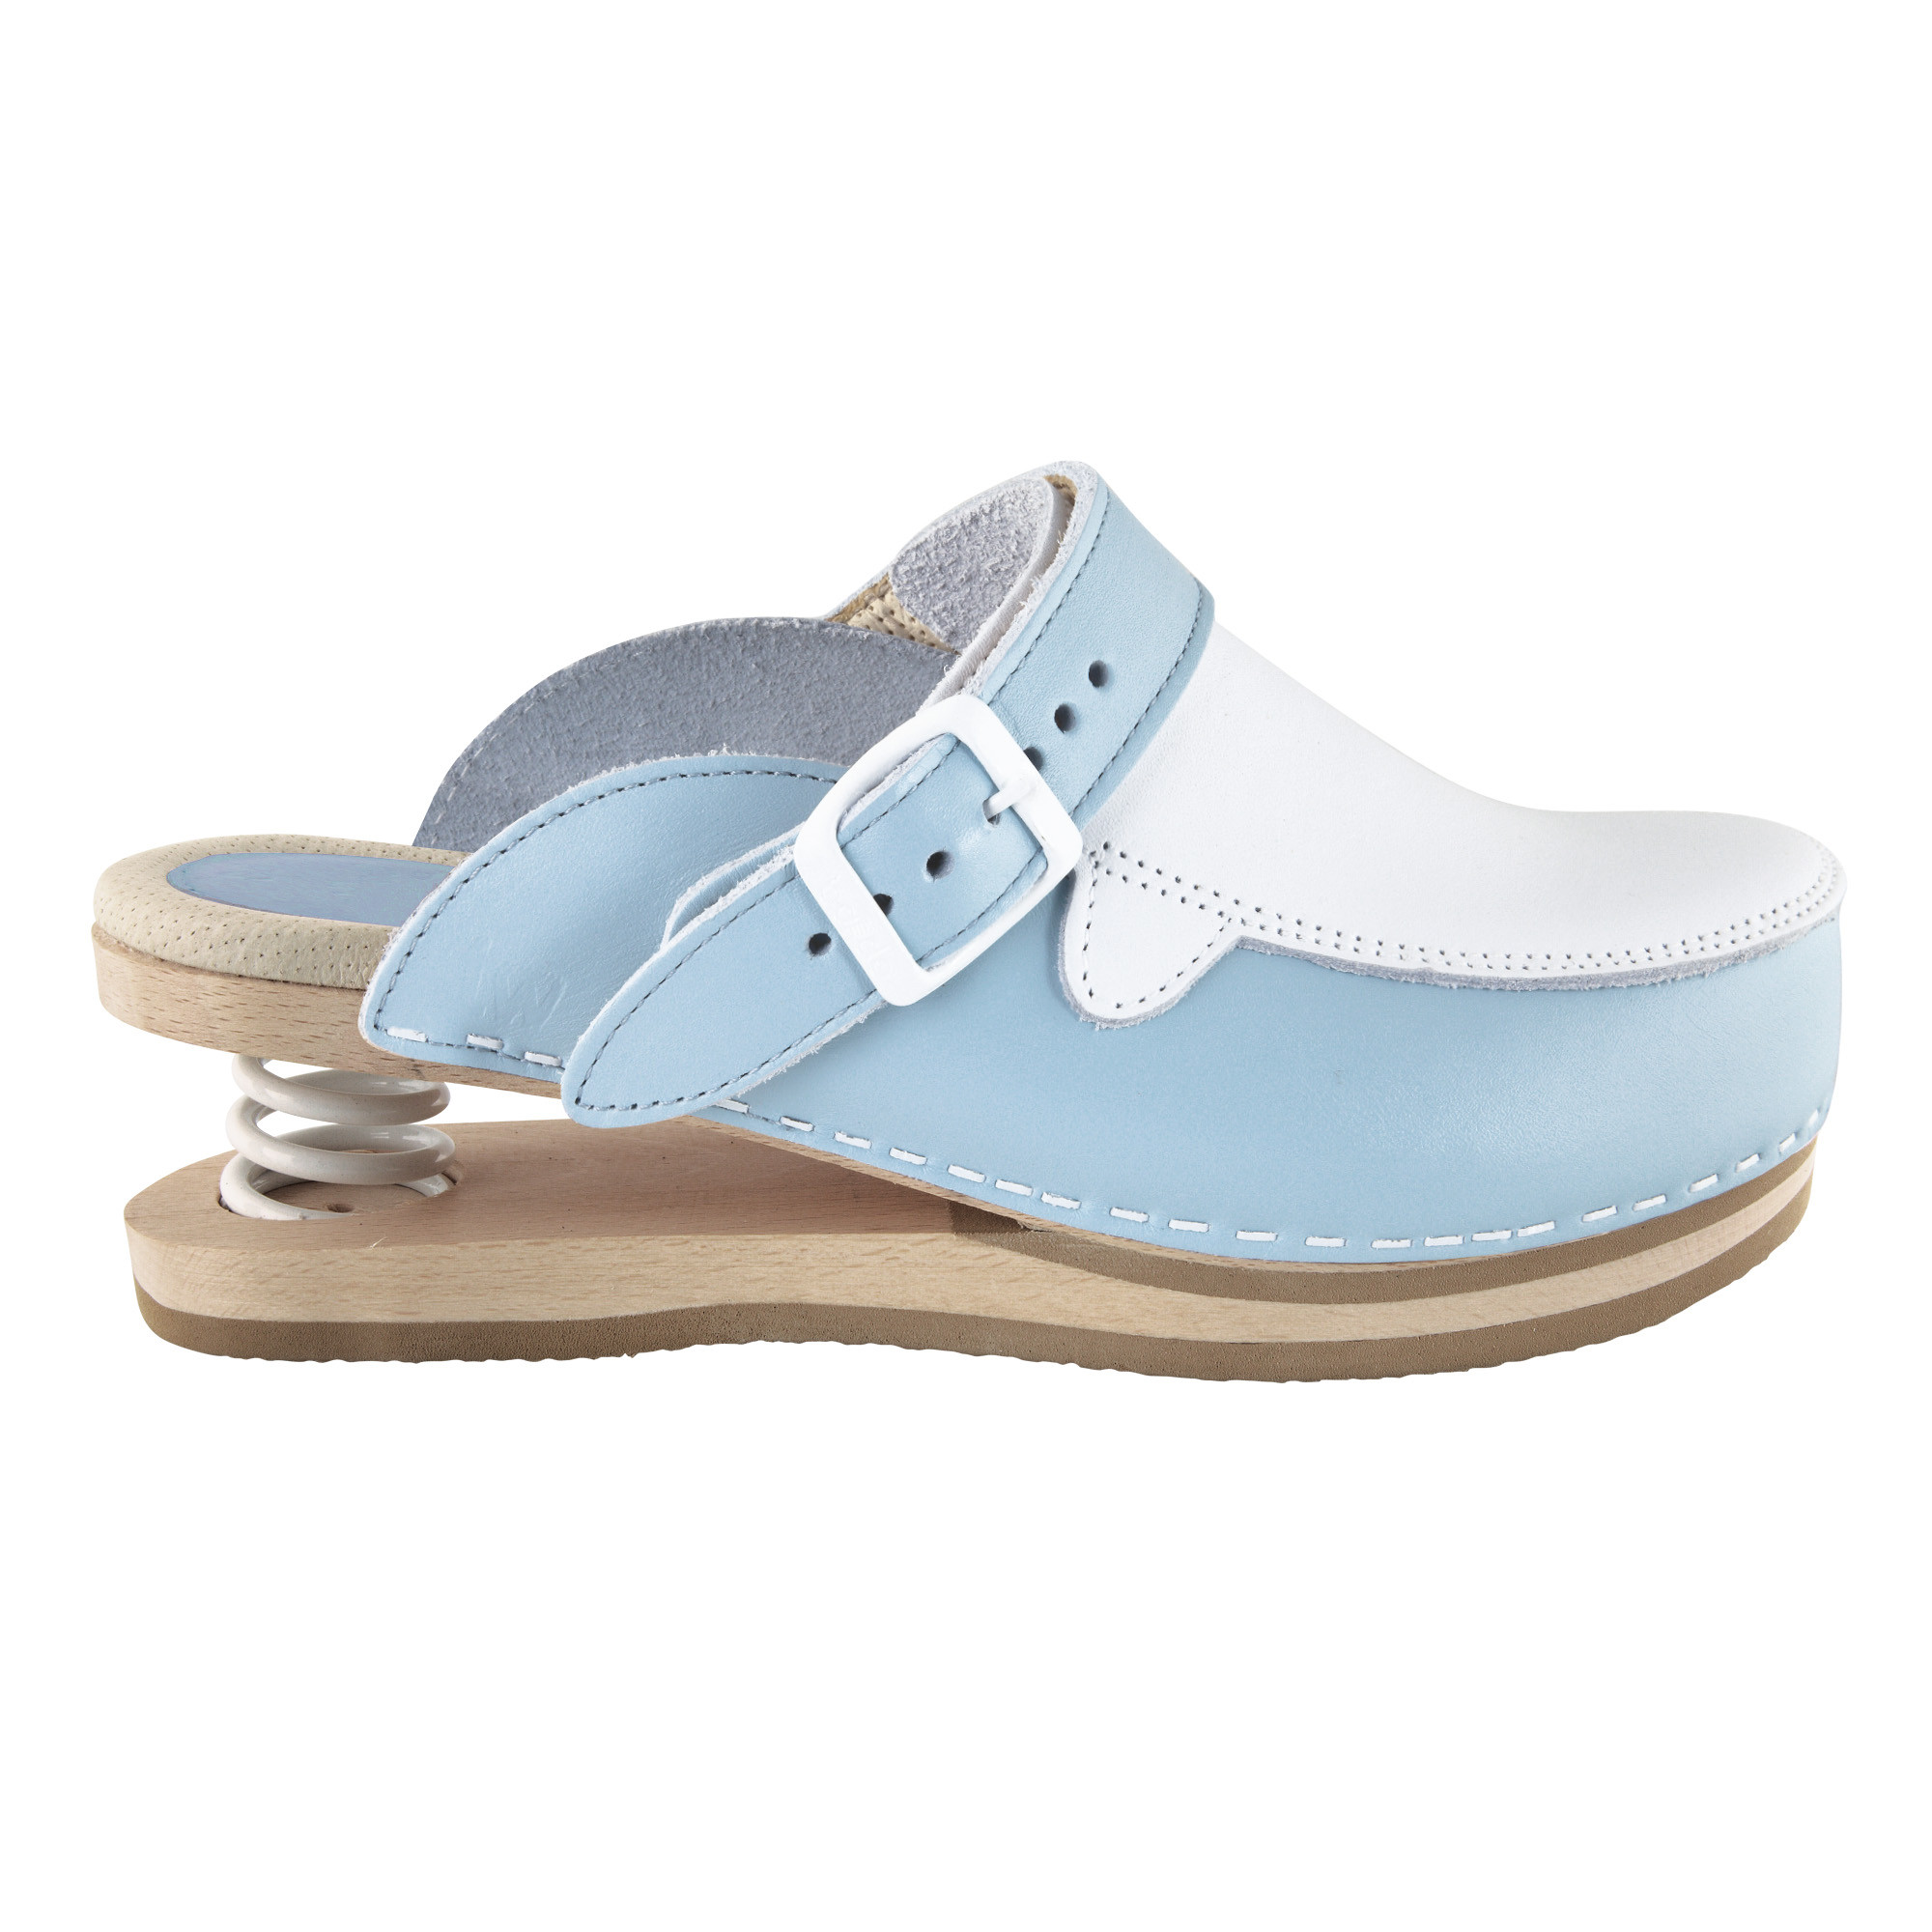 Relax clogs closed with blue spring Size 37